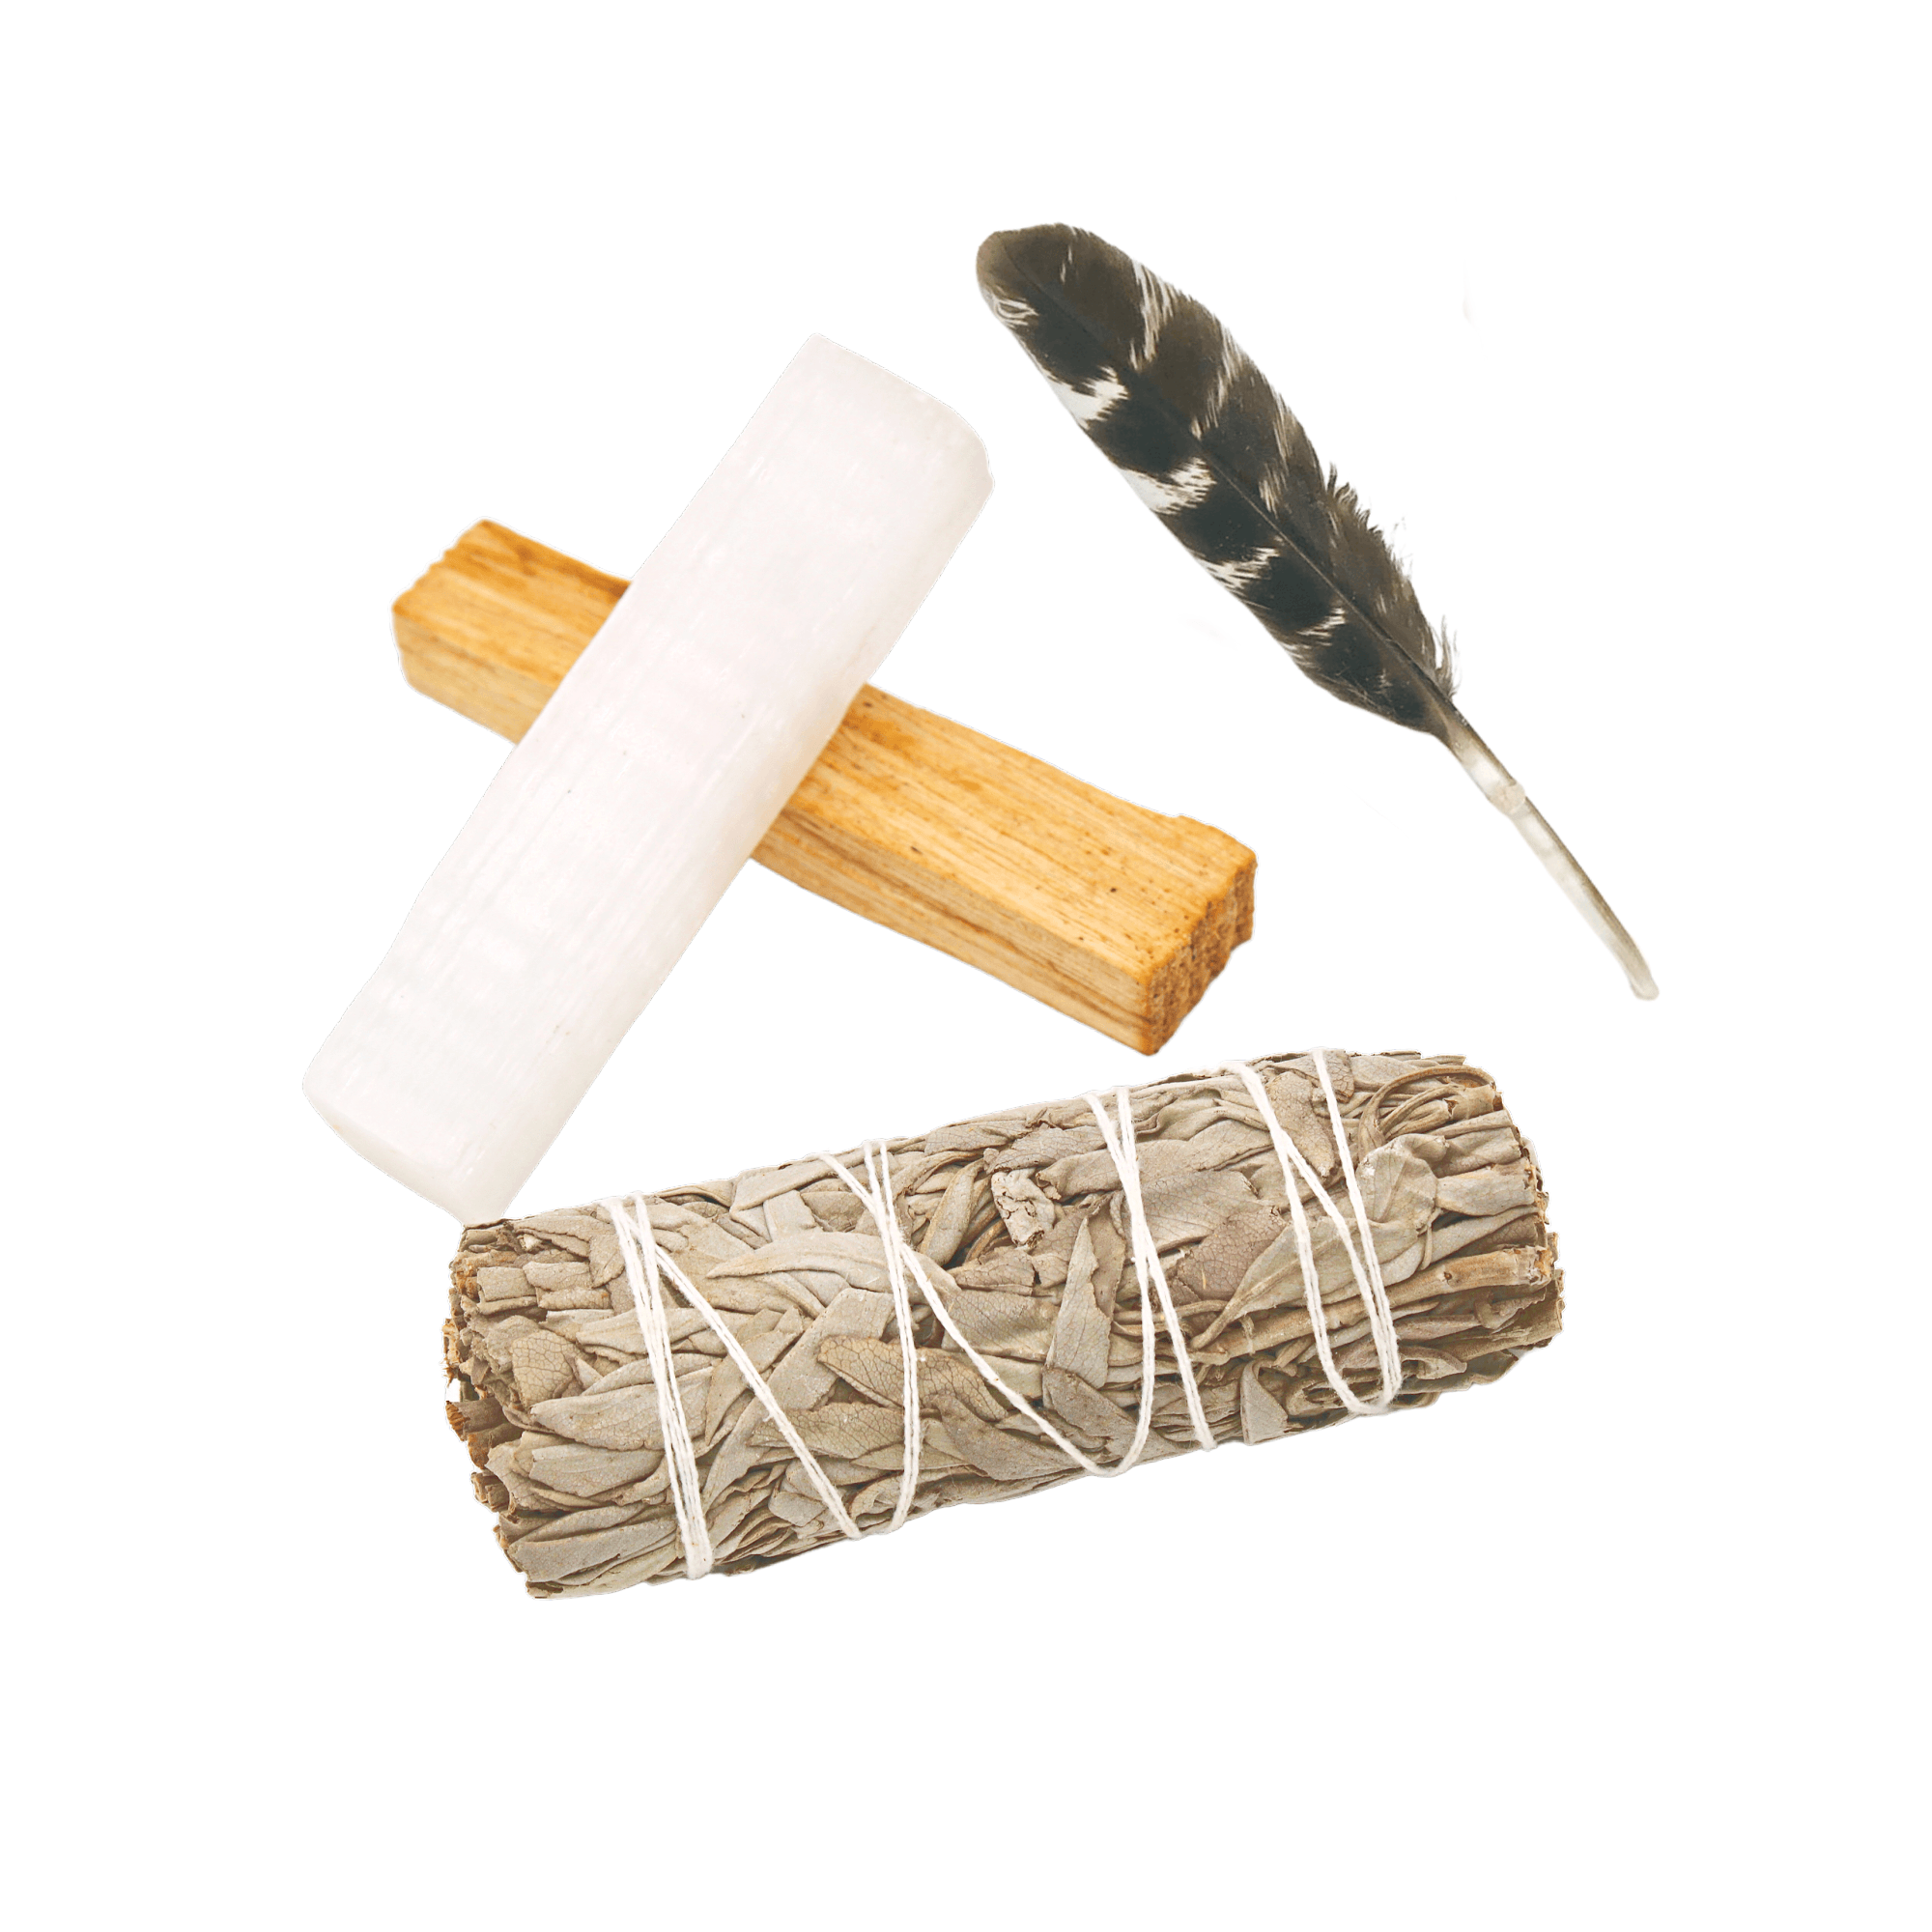 CLEANSING SMUDGE KIT - Energy Wicks